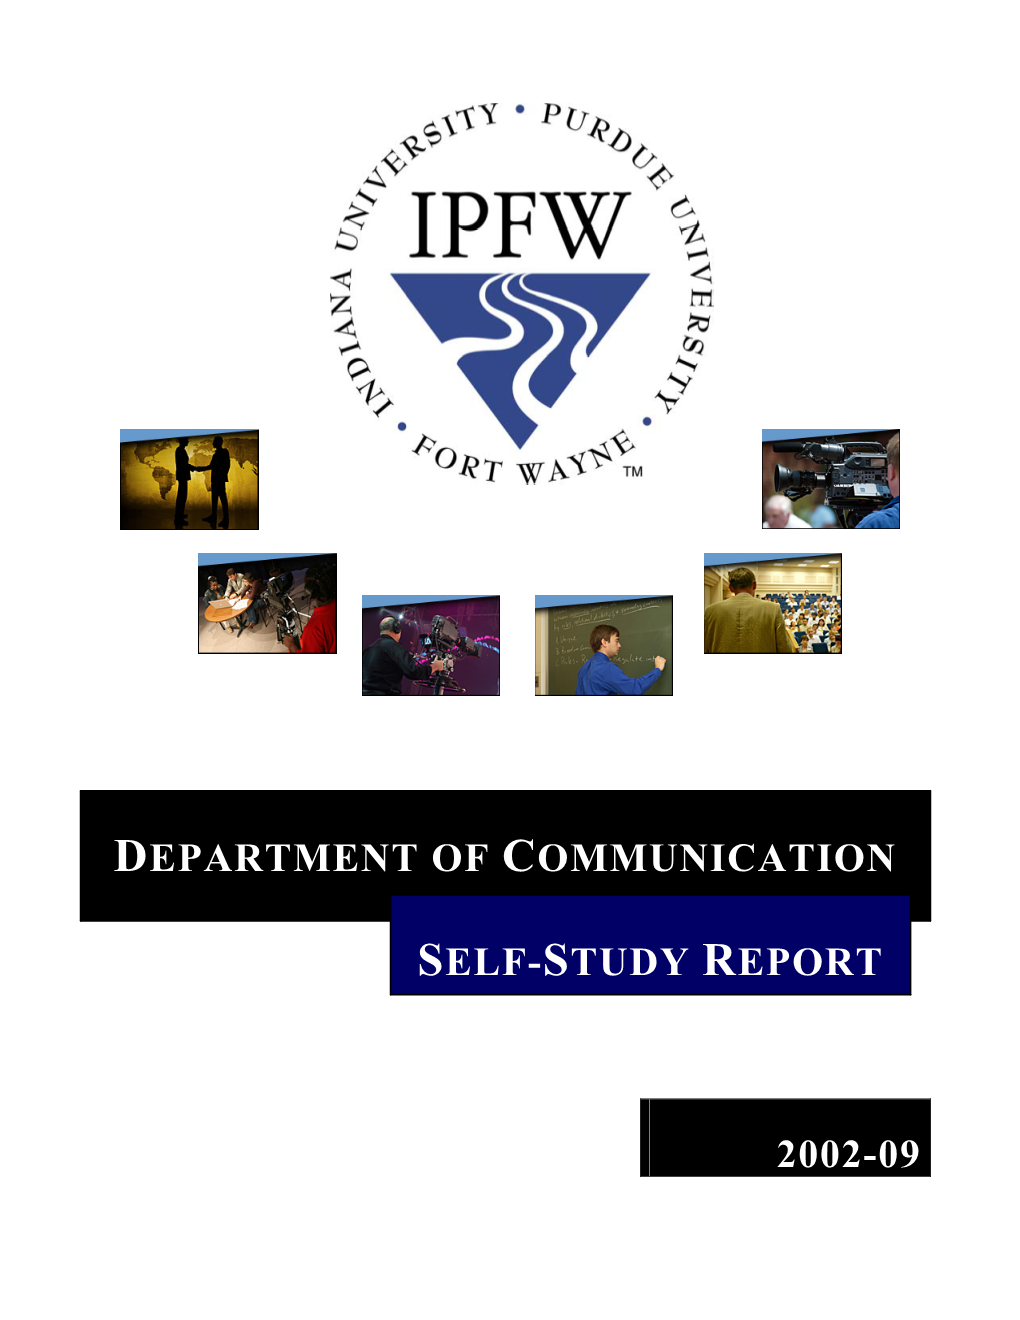 Department of Communication Self-Study Report